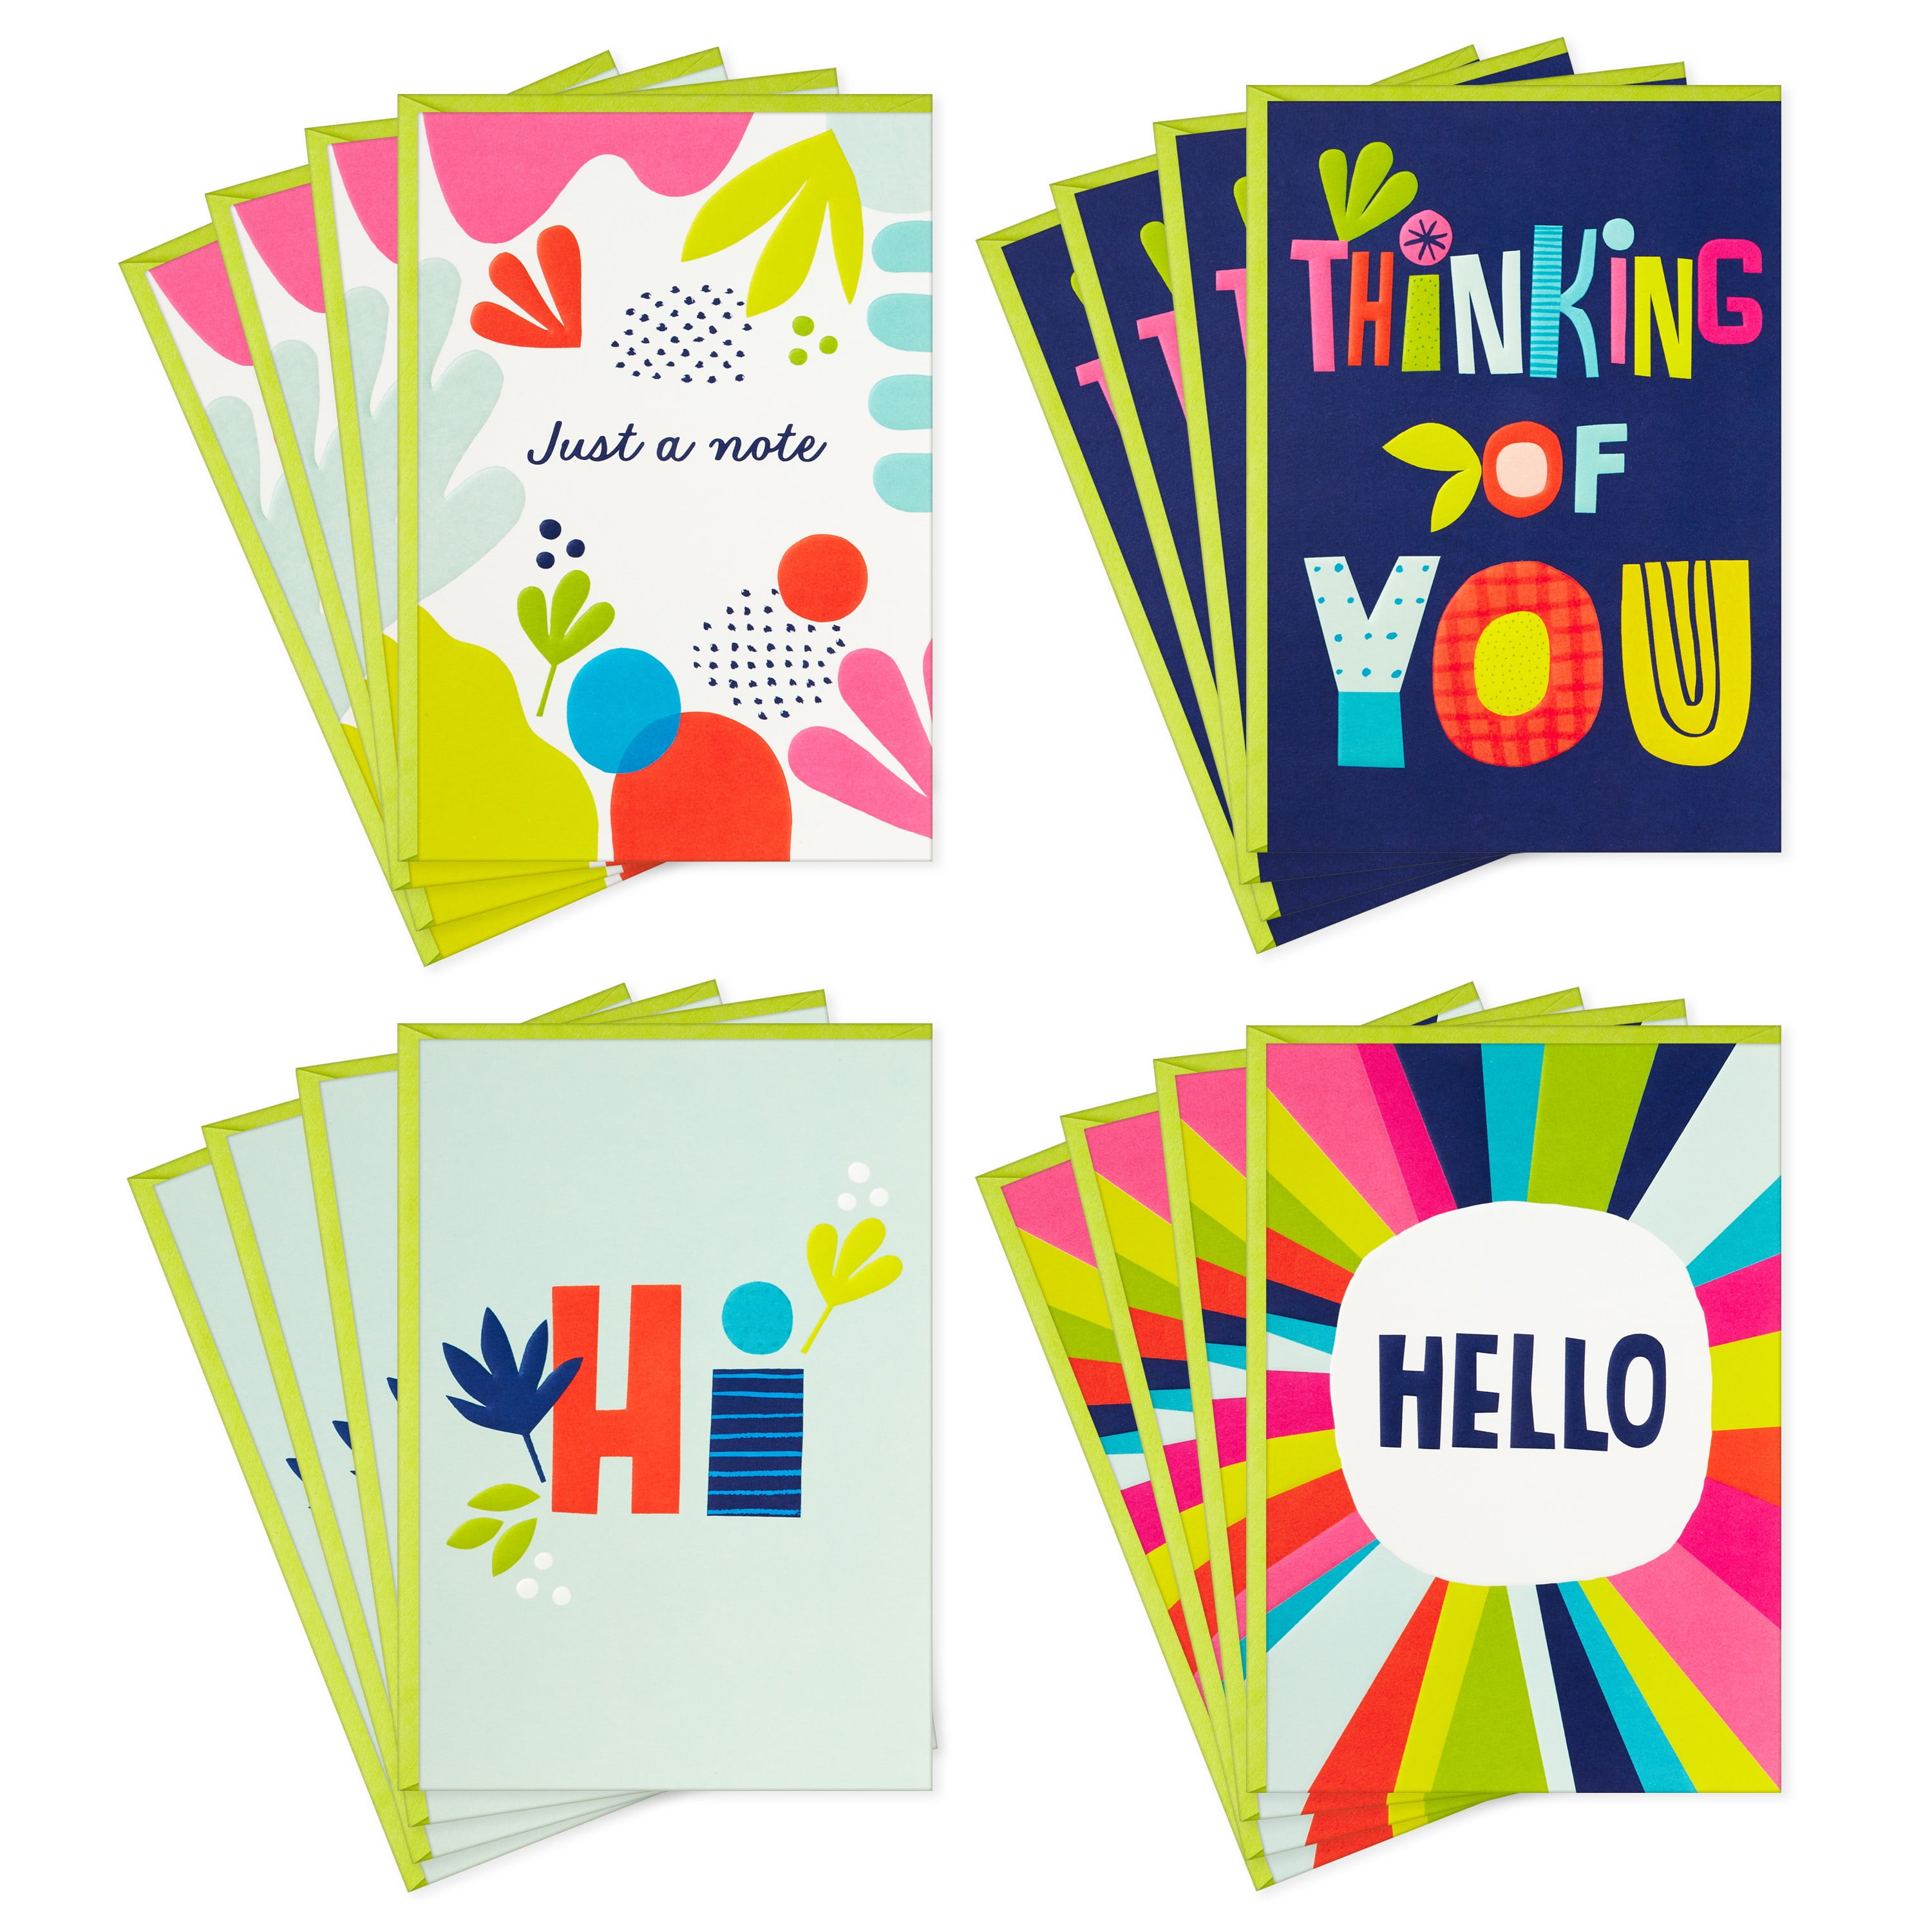  Heavyweight Small Blank Note Cards with Envelopes for Card  Making - 40 Cards and Envelopes Set - Bright White Card Stock For Making  Greeting Cards, Thank You Cards, and Notecards : Office Products